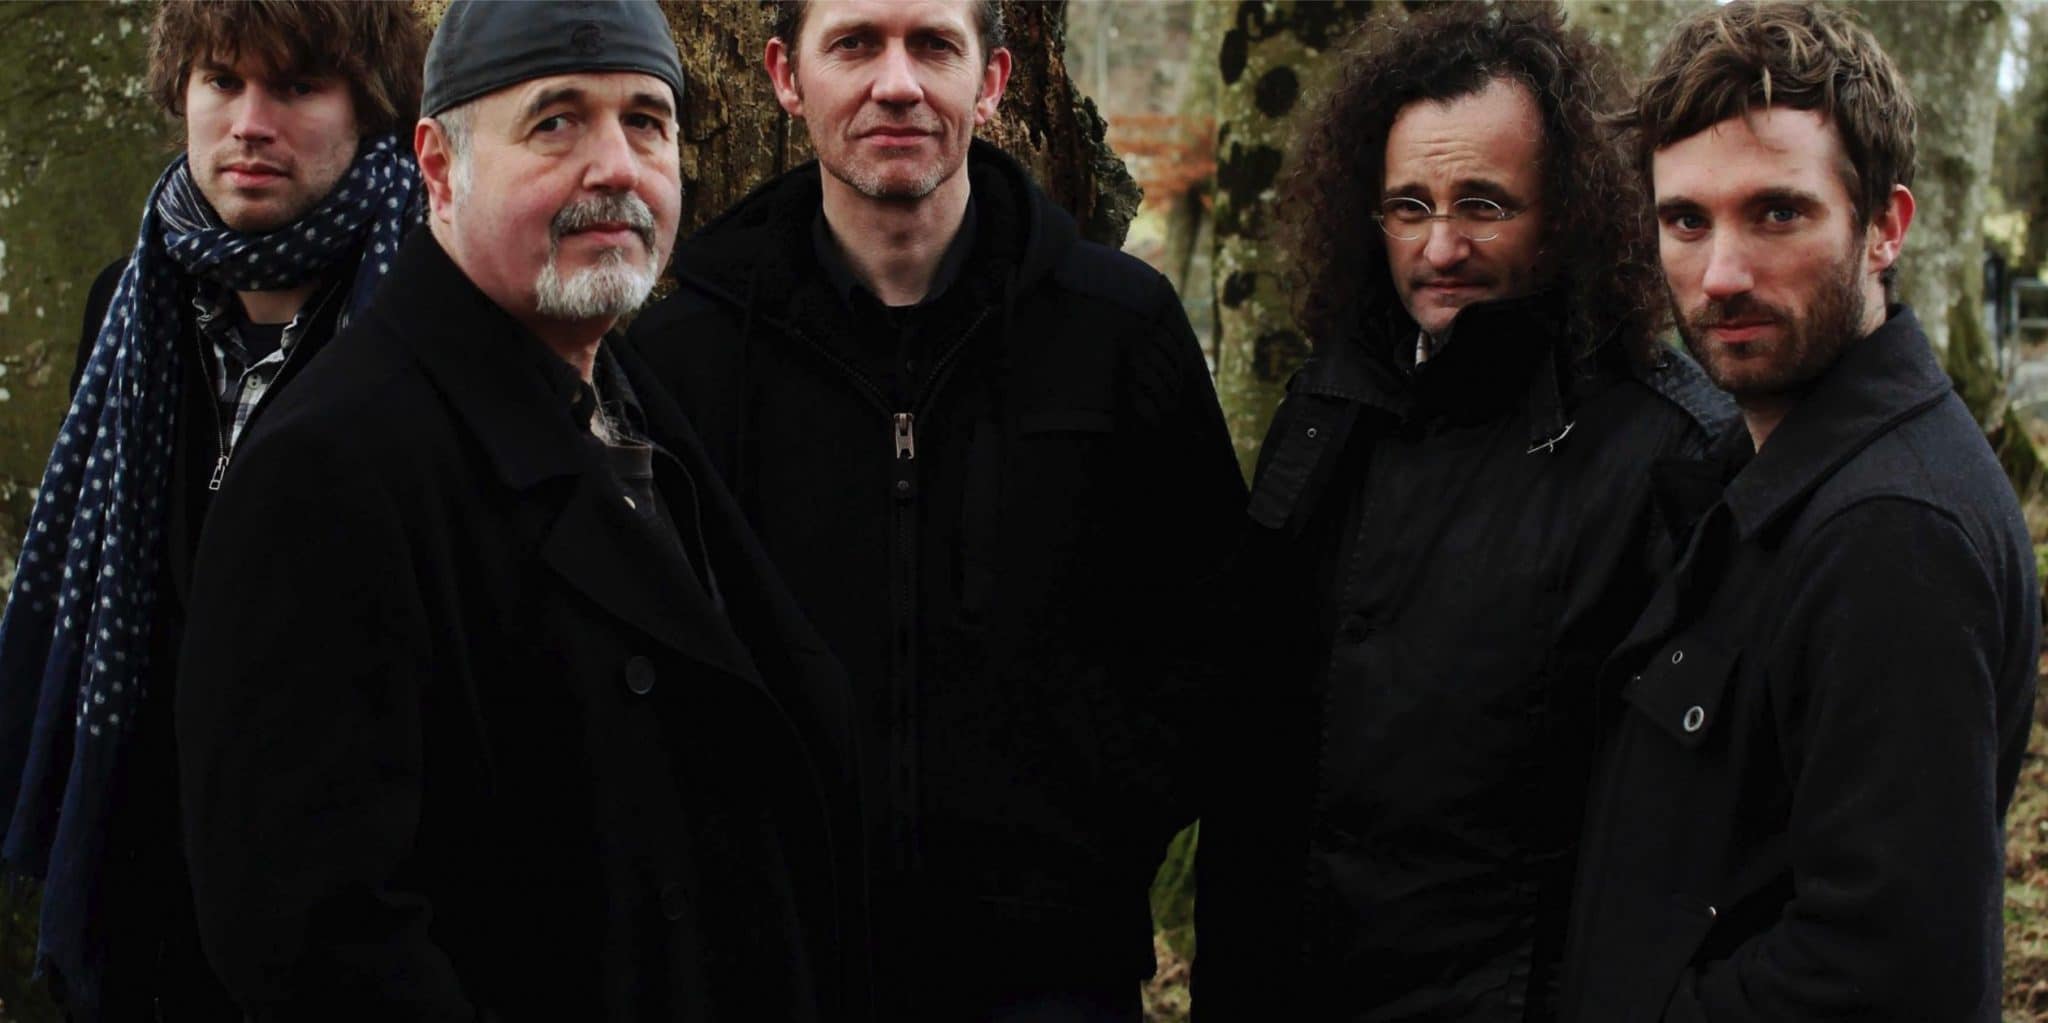 The Gloaming: Taking It To The Live